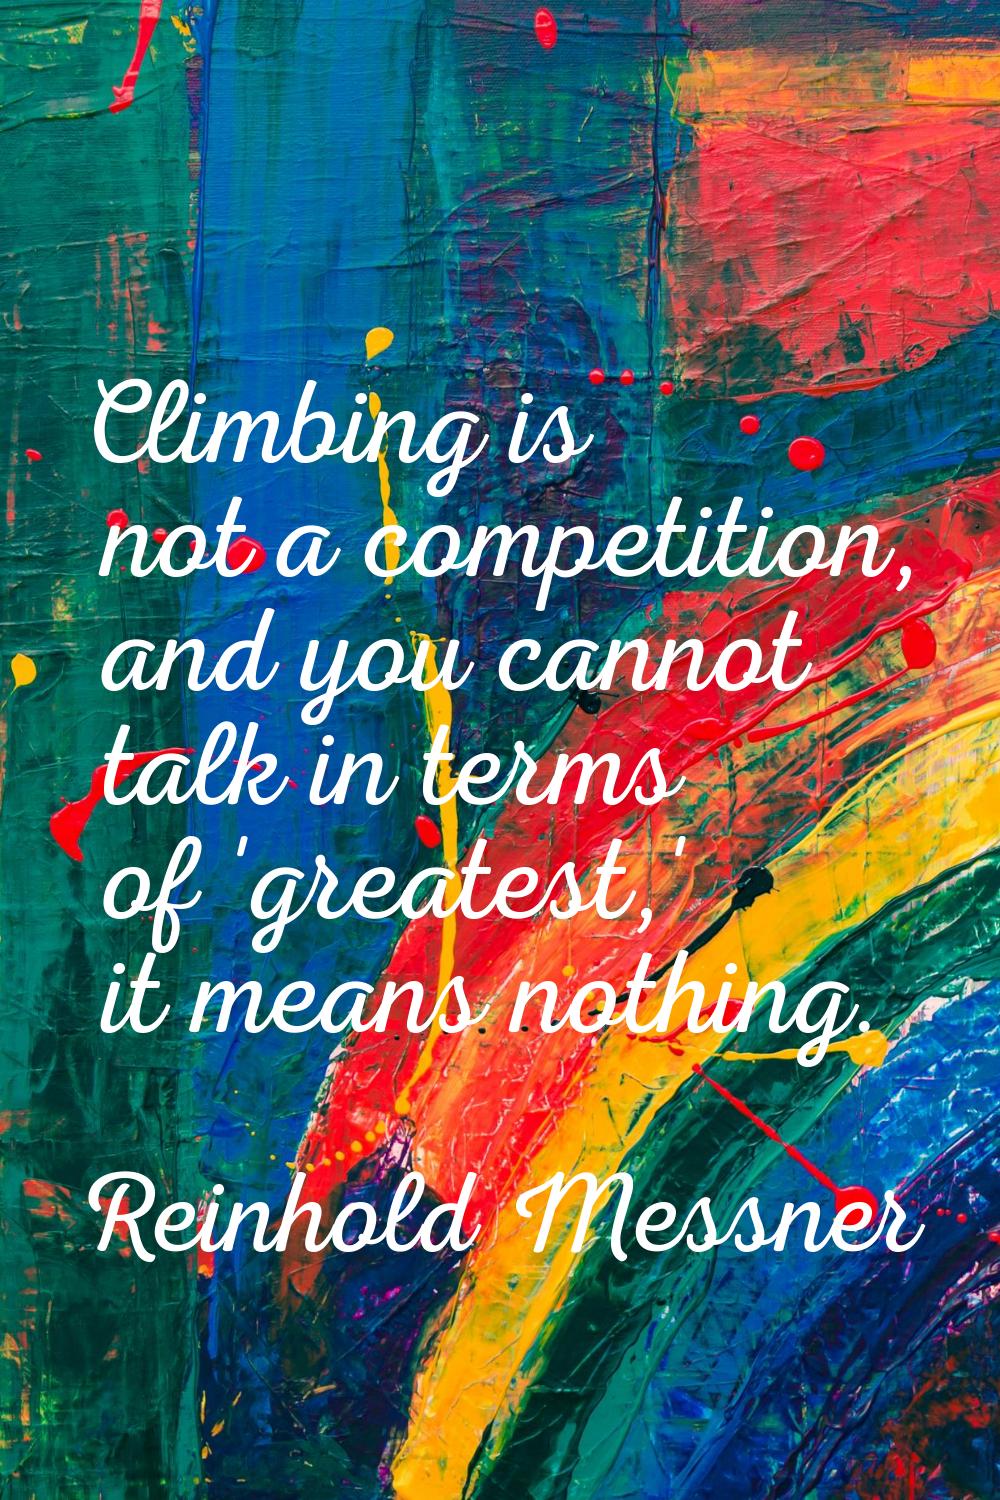 Climbing is not a competition, and you cannot talk in terms of 'greatest,' it means nothing.